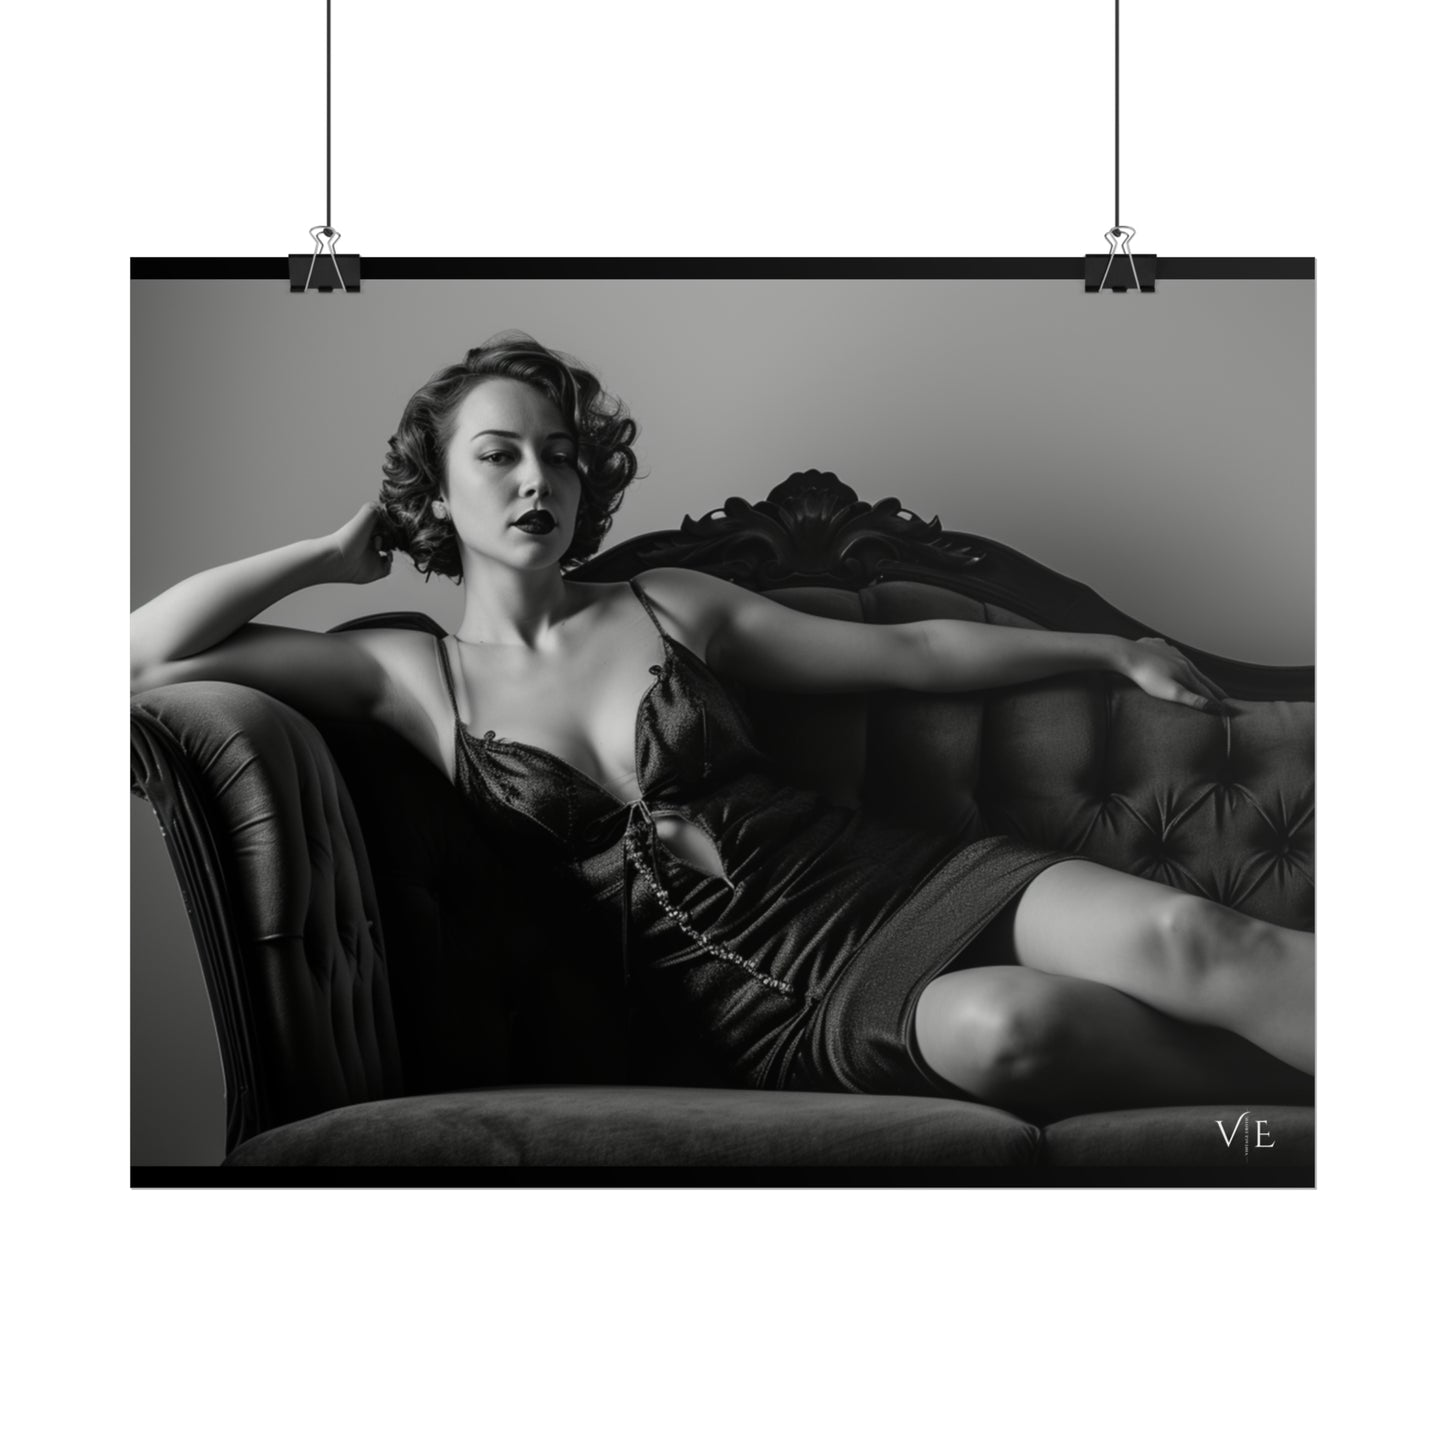 Black and White Vintage Photoshoot - Woman on a Couch